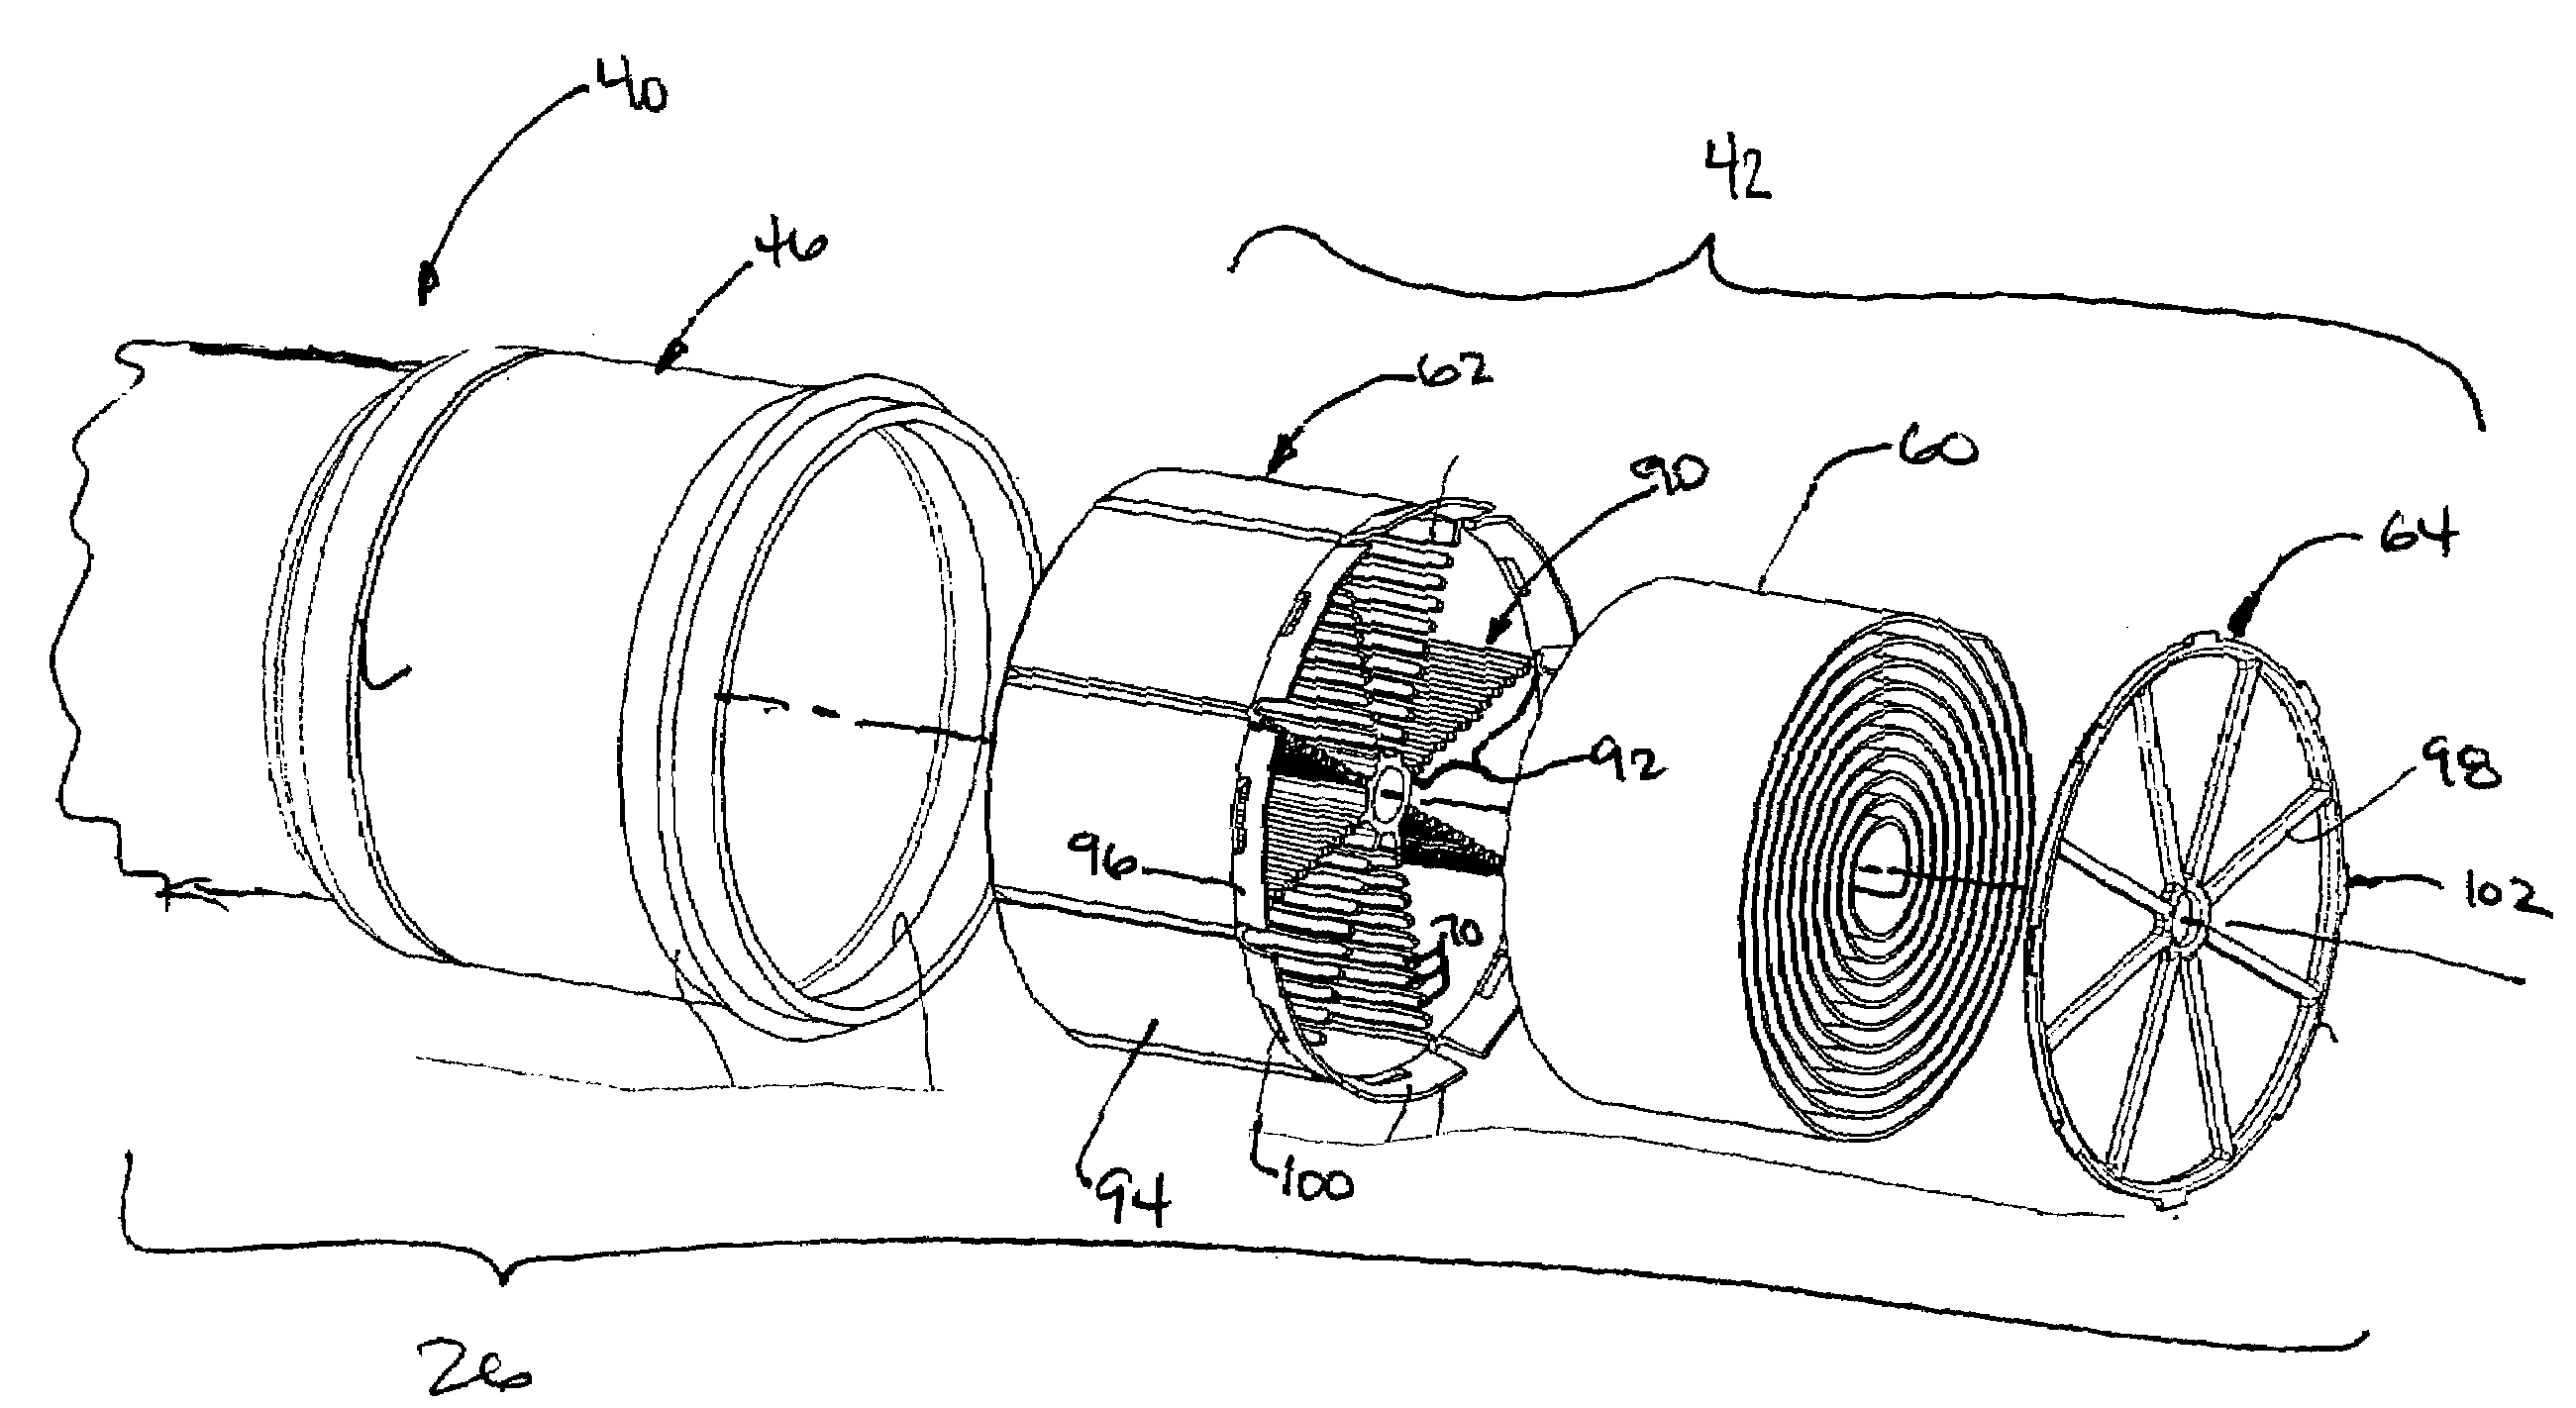 Air induction system with hydrocarbon trap assembly